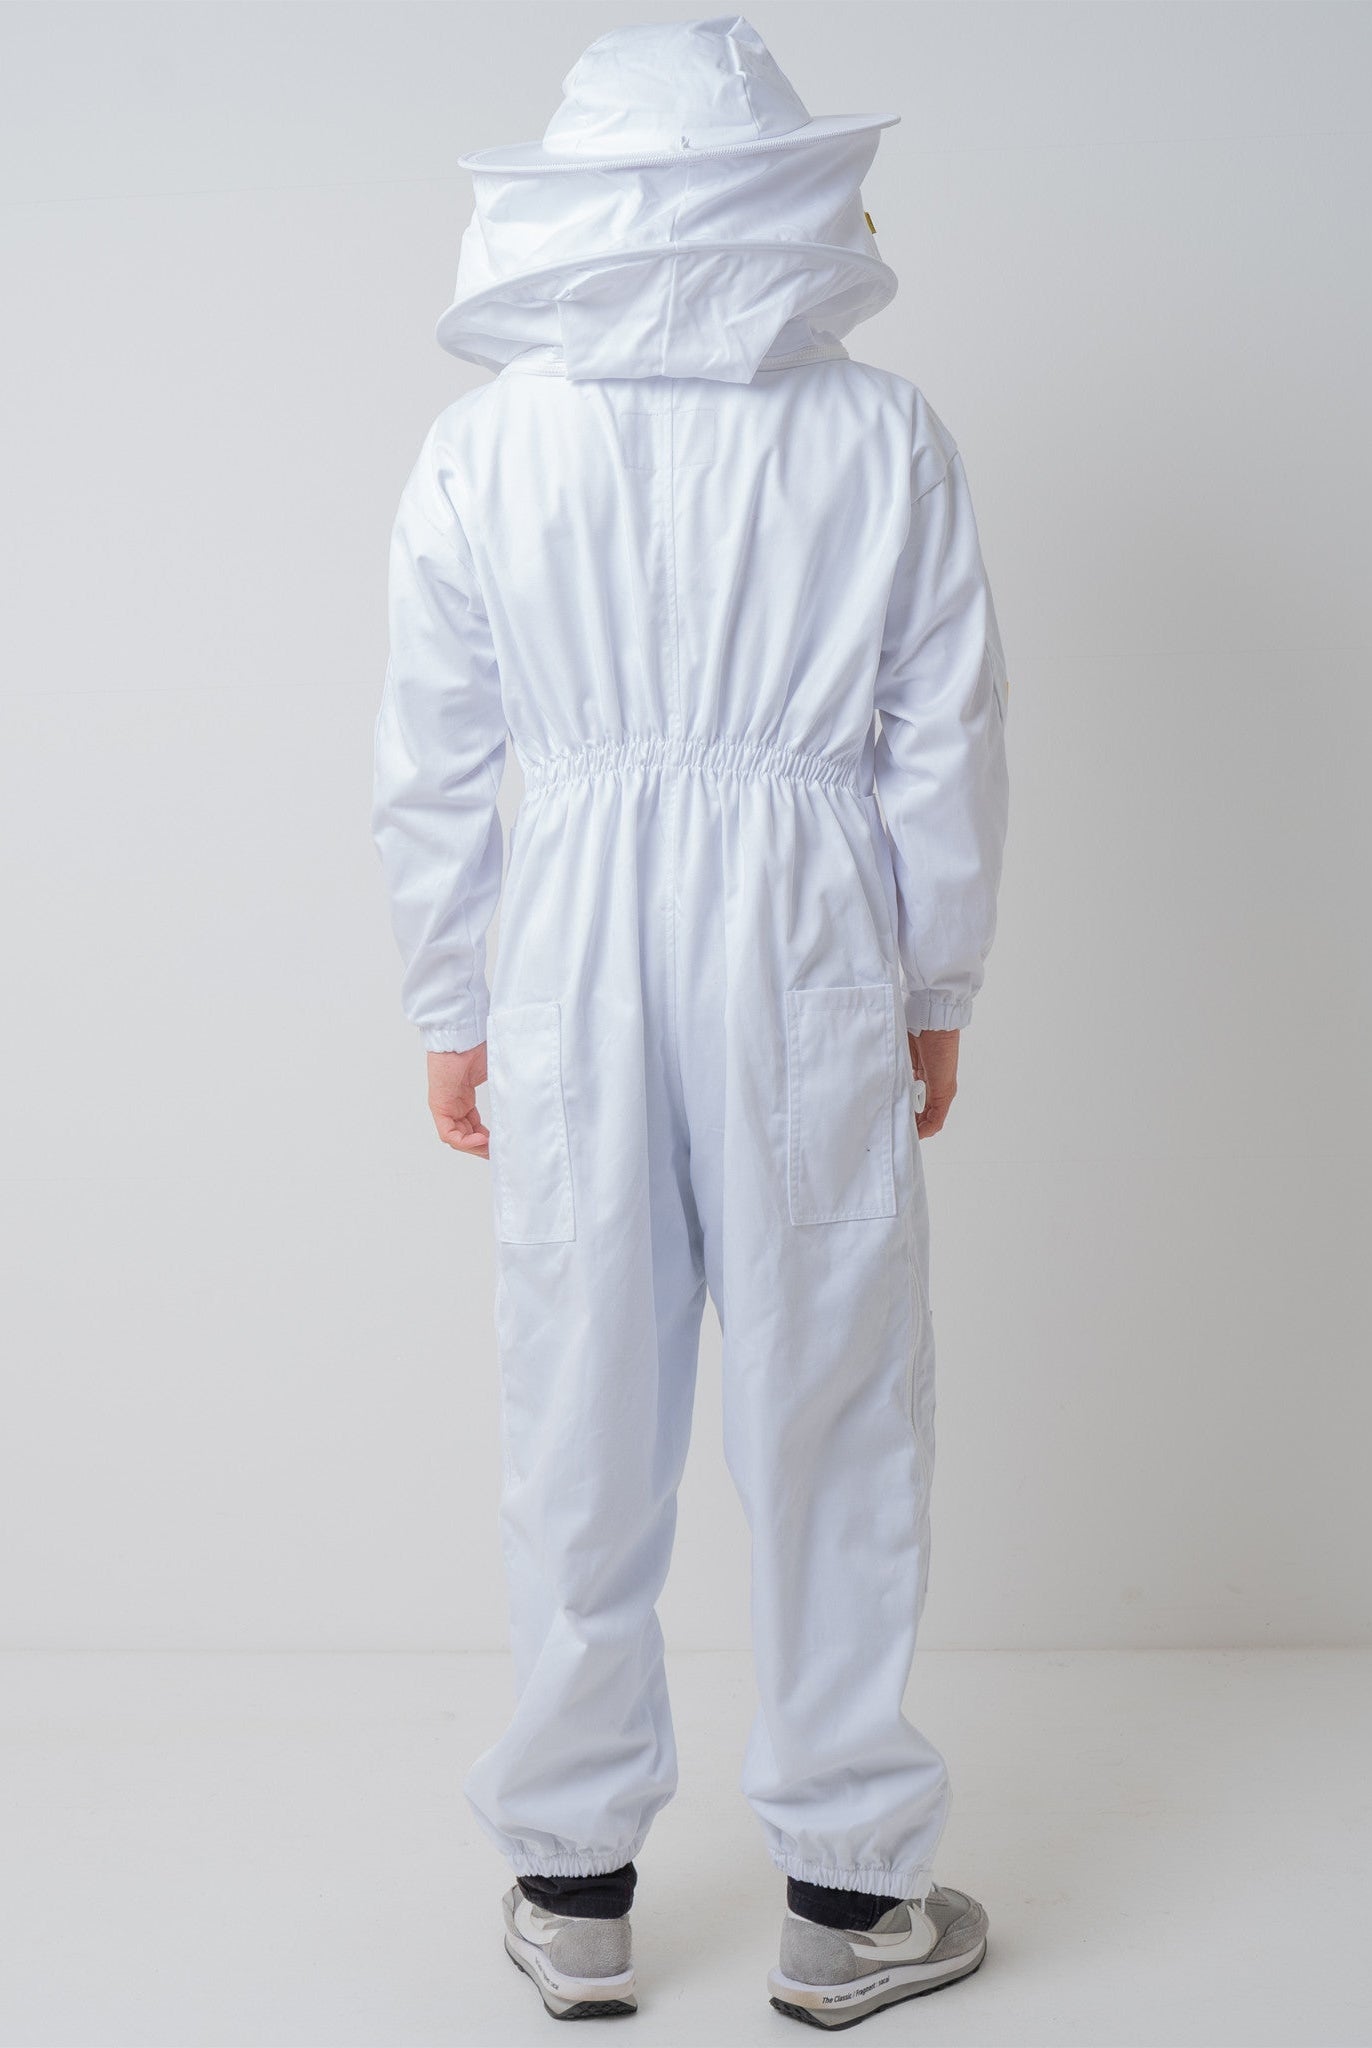 OZ Armour Beekeeping Suit with Fencing Veil – Packaged for convenience and protection.